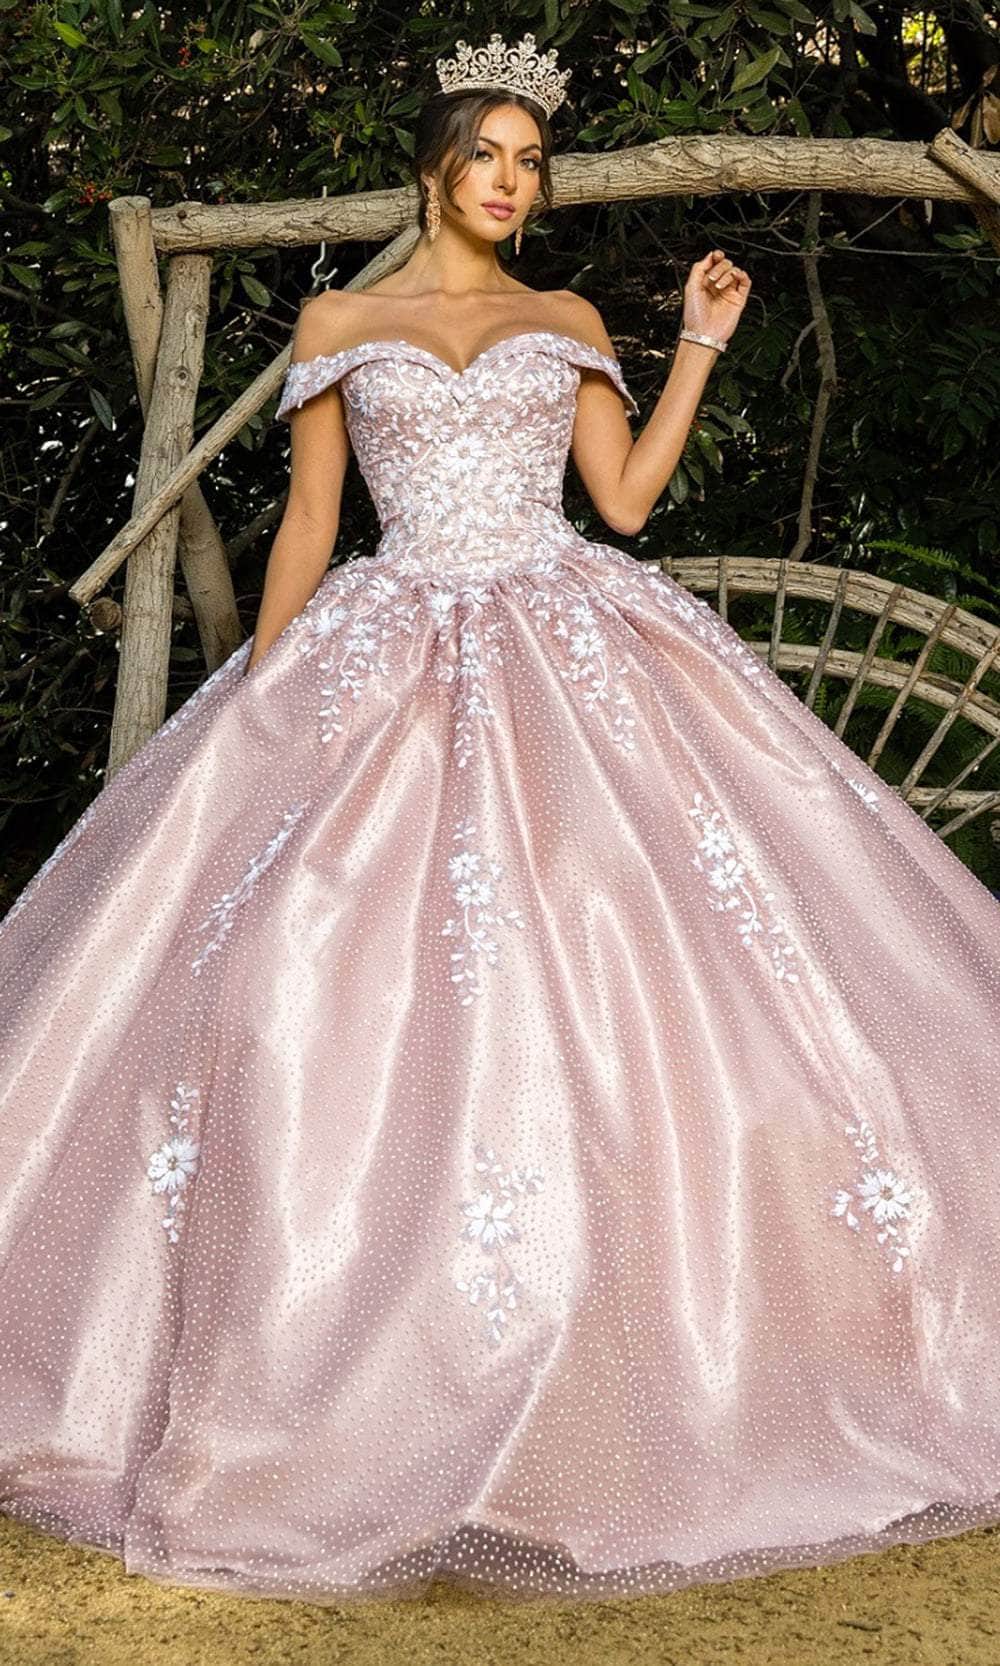 Dusty Rose Corset Tulle Prom Ball Gown – Unique Vintage